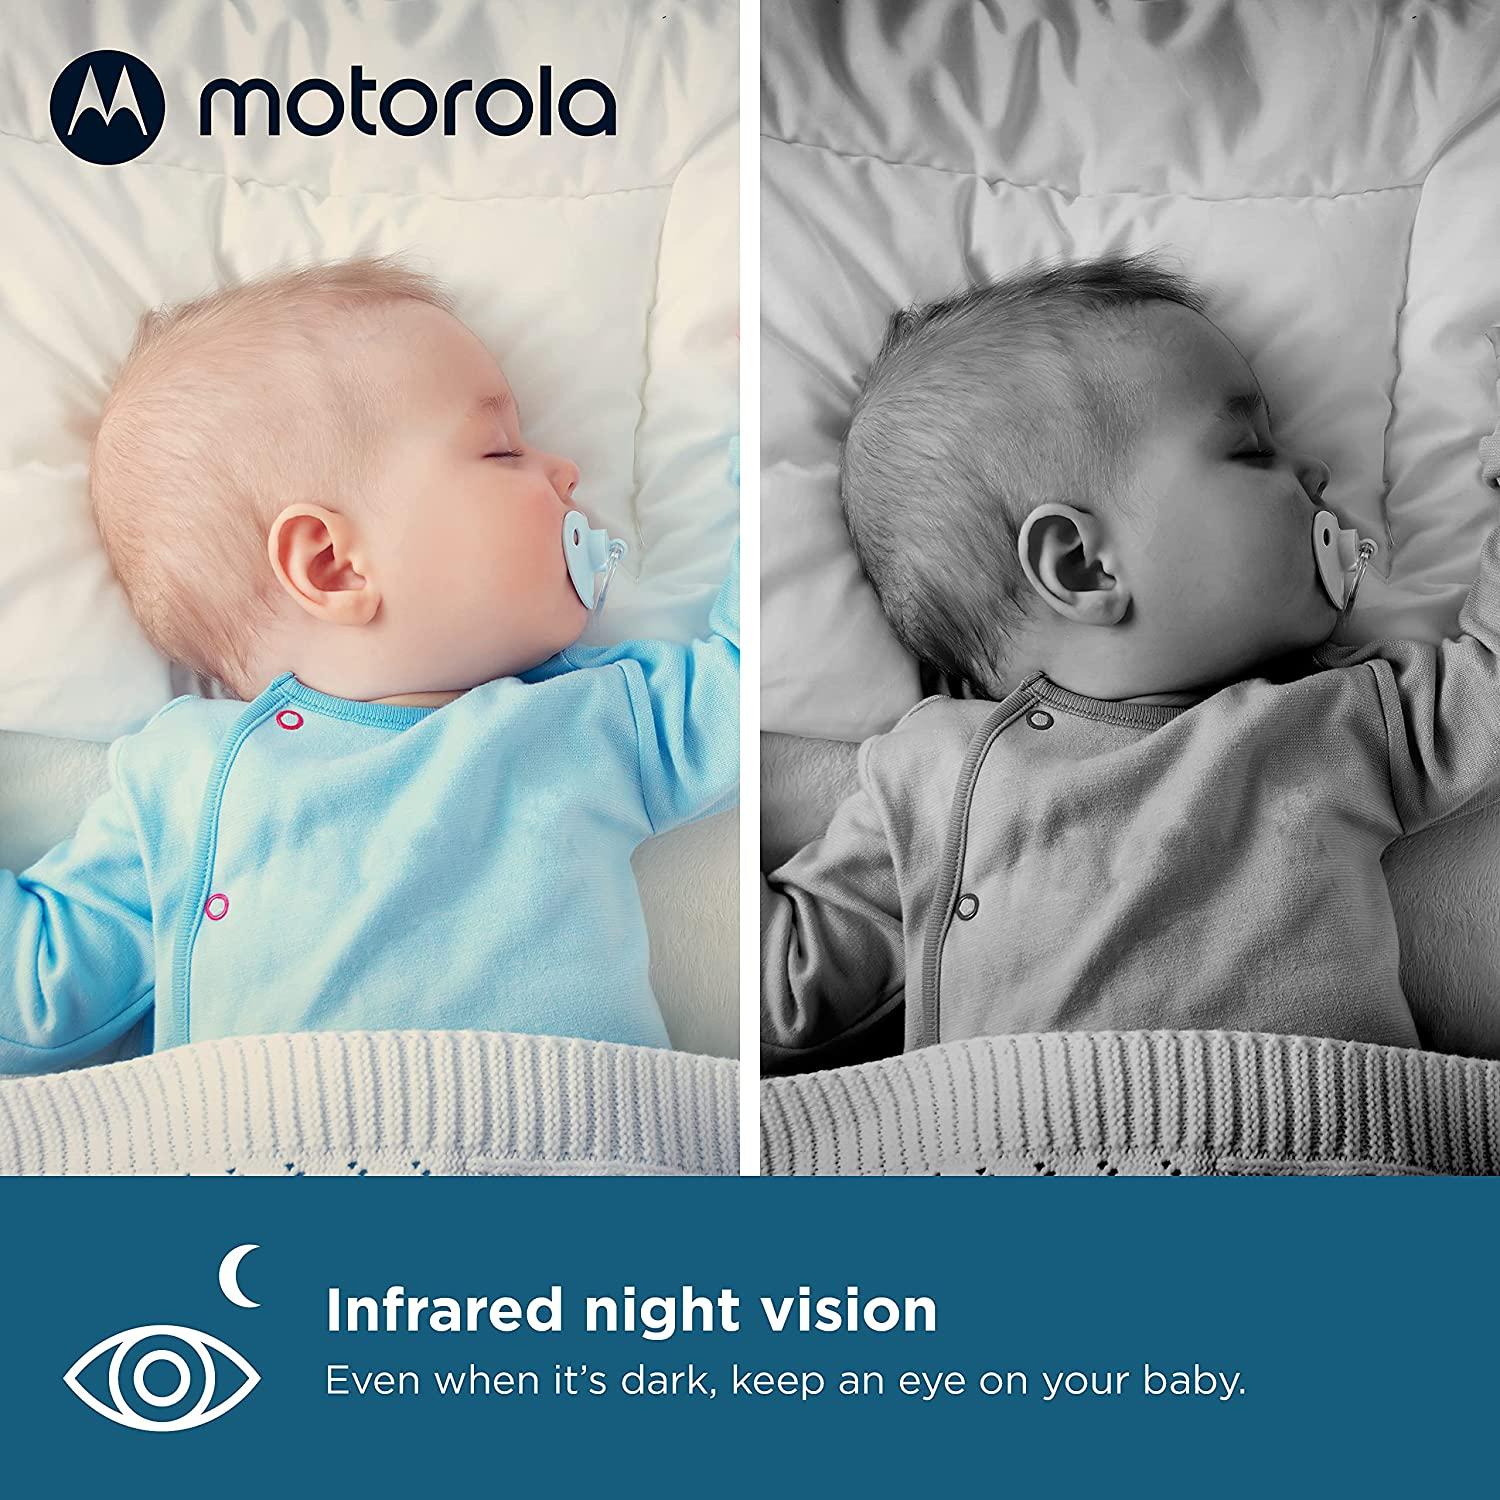 Motorola Baby Monitor VM65-5 WiFi Video Baby Monitor with Camera HD 1080p  - Connects to Smart Phone App, 1000ft Long Range, Two-Way Audio, Remote